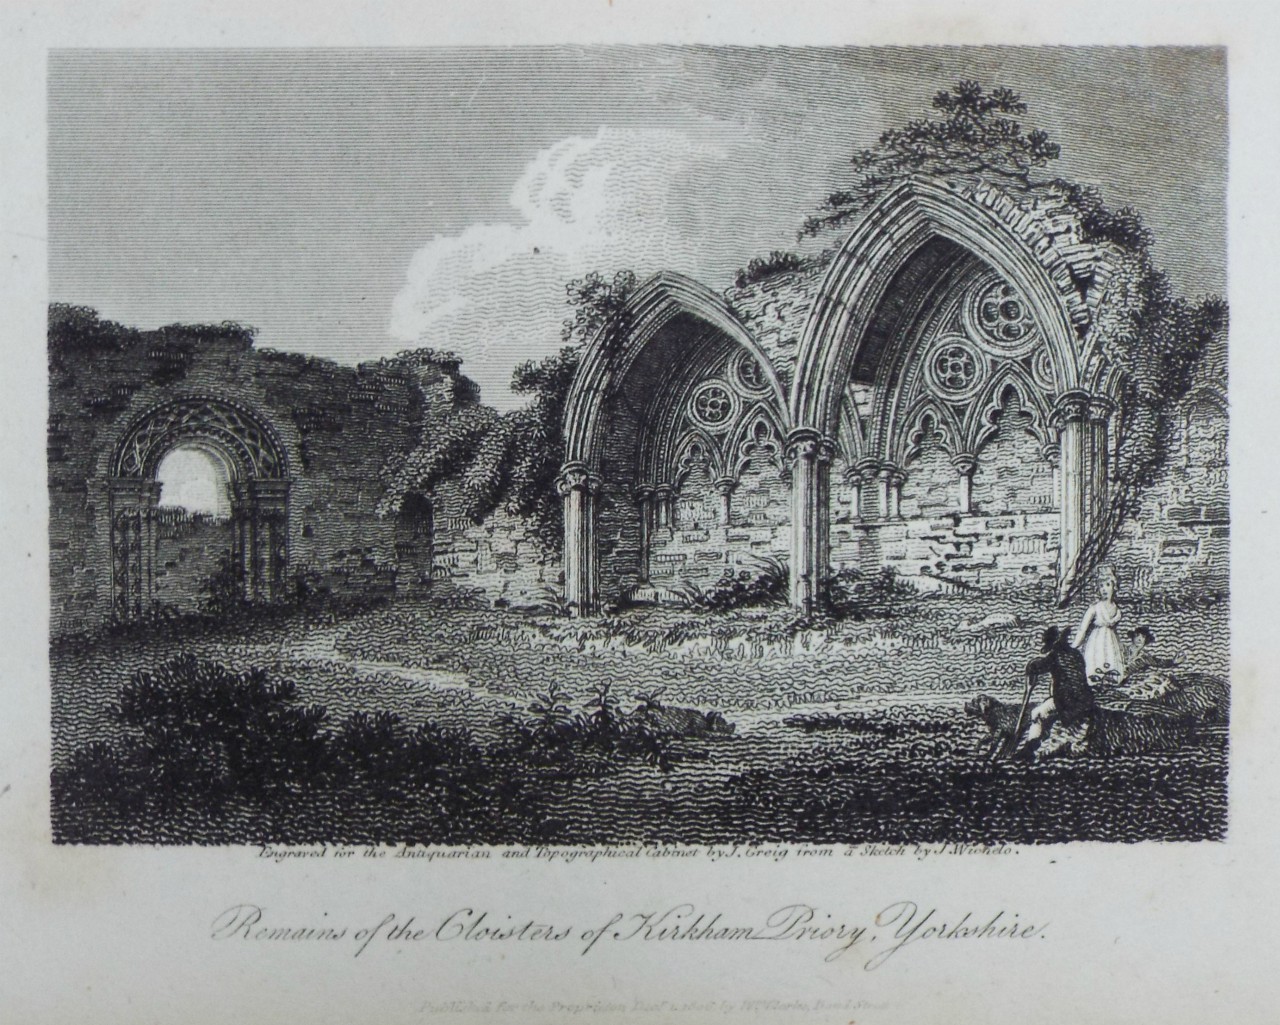 Print - Remains of the Cloisters of Kirkham Priory, Yorkshire. - Greig